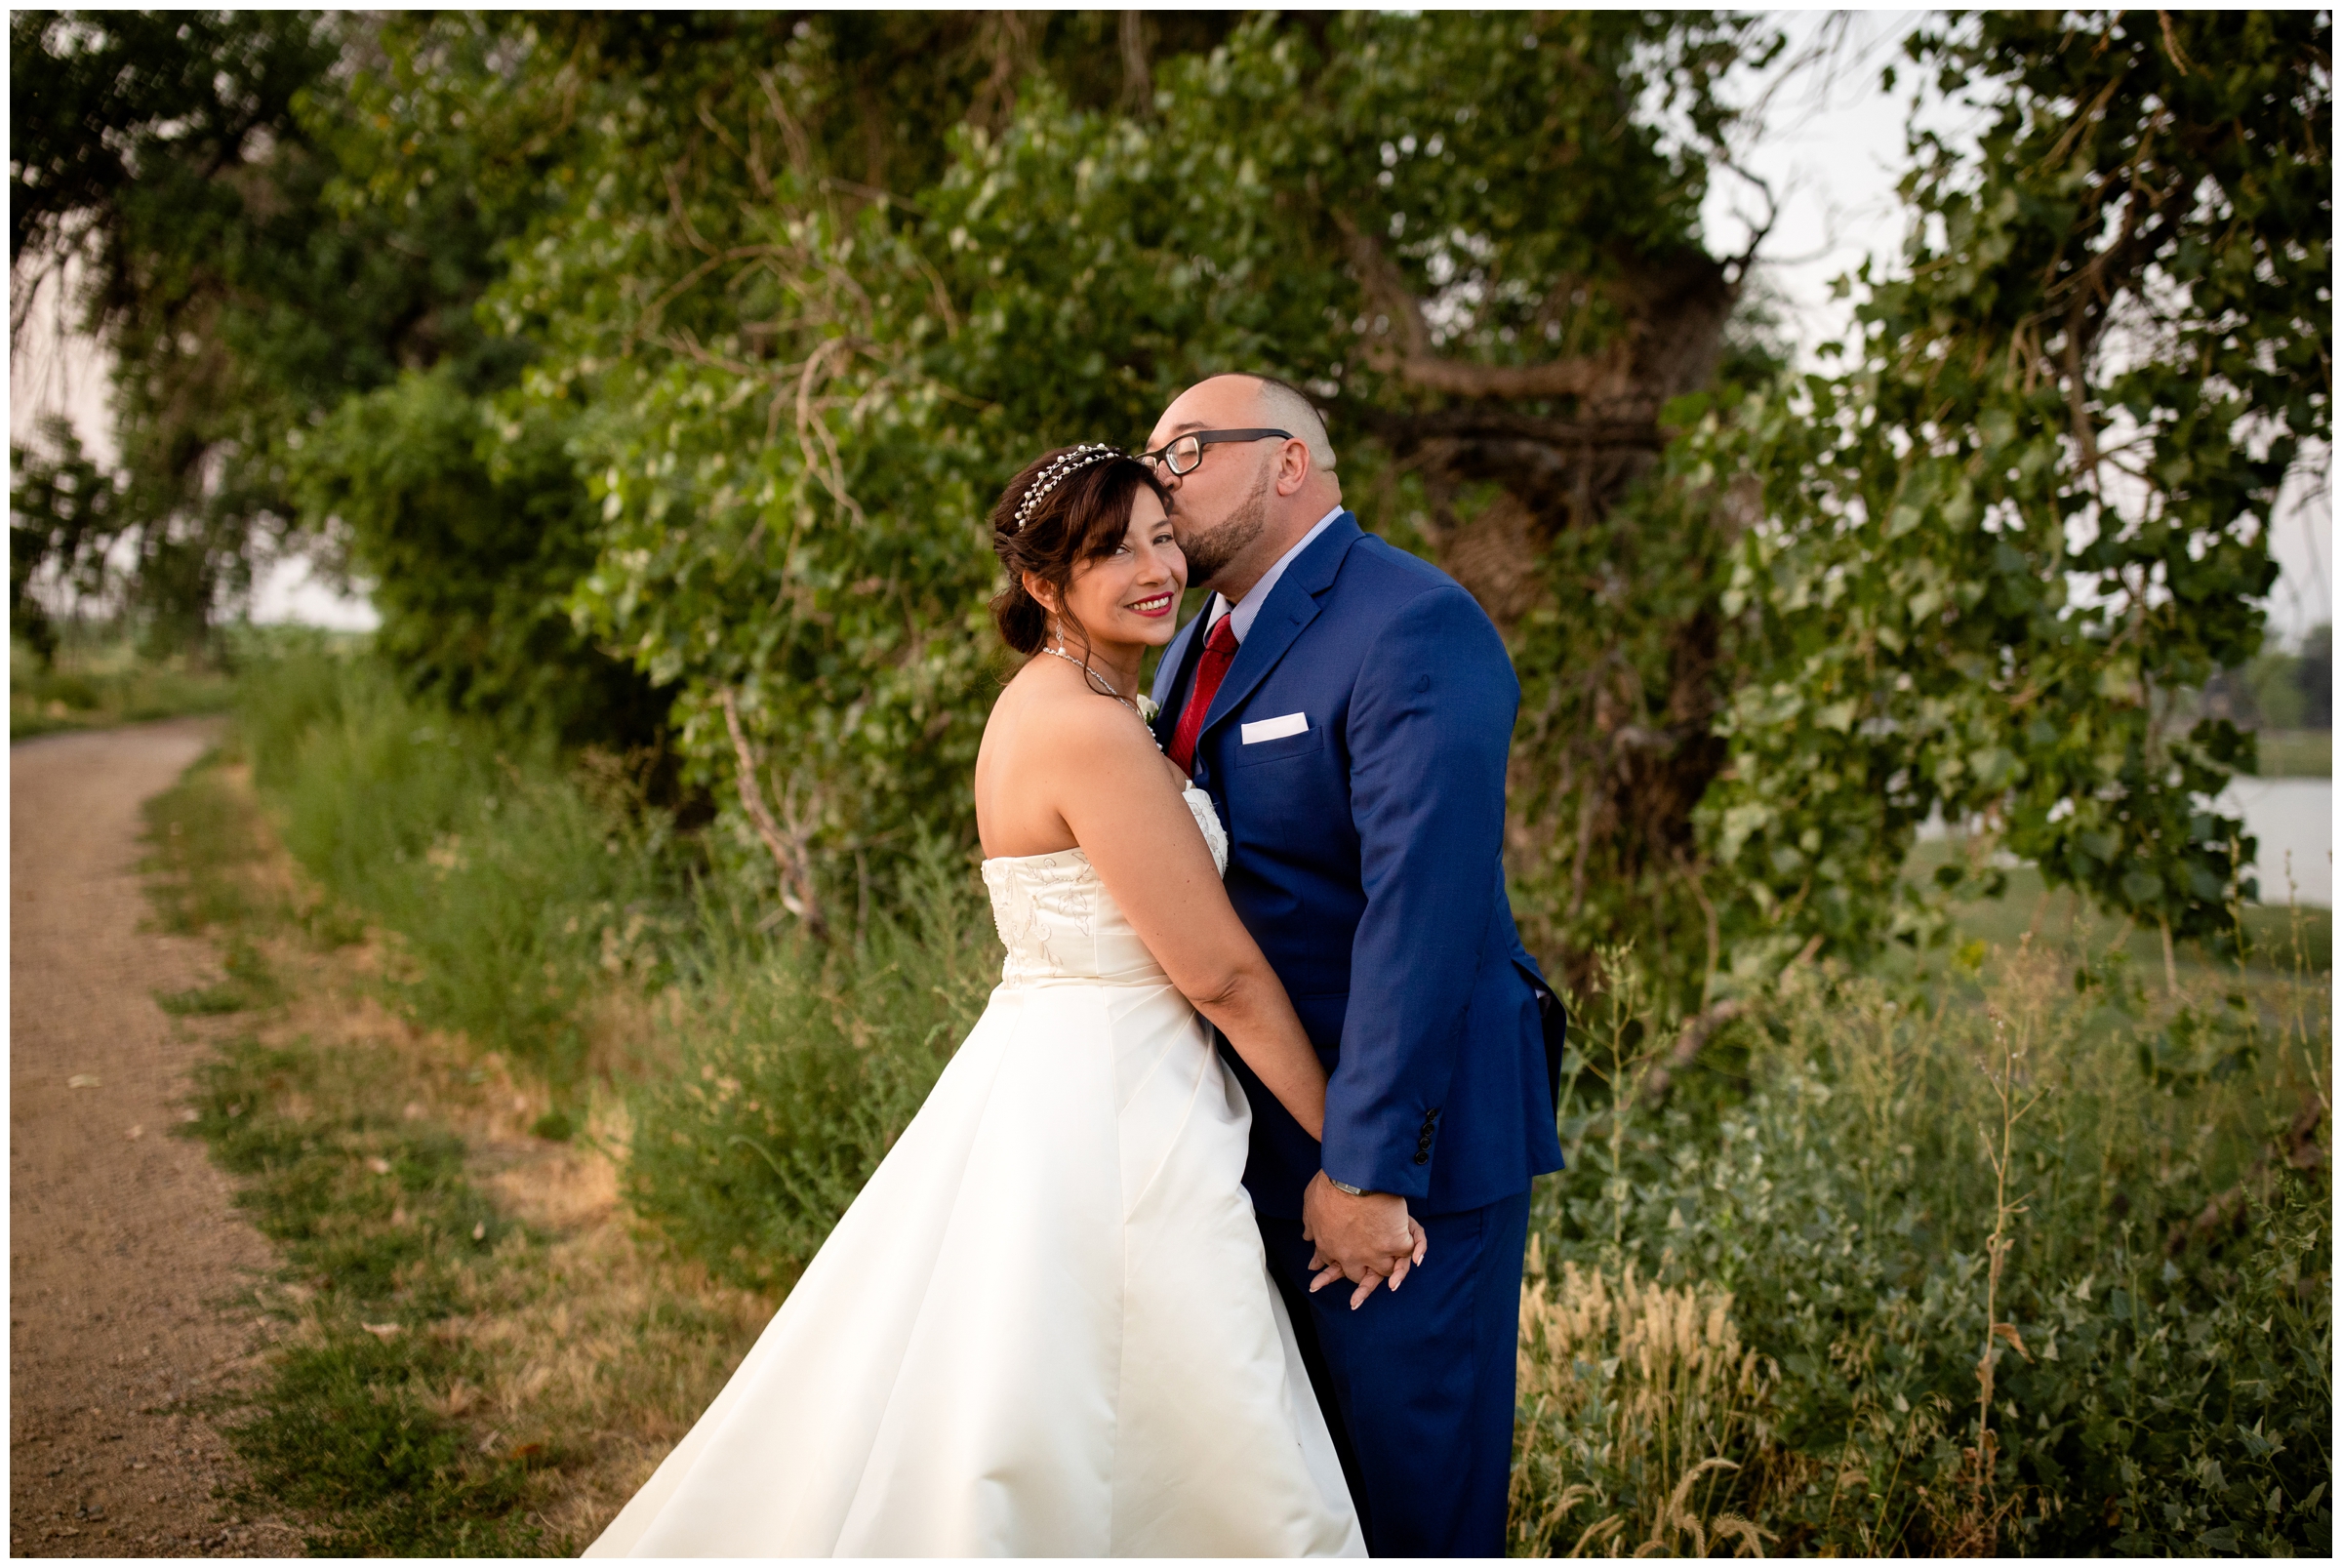 Brighton Colorado intimate wedding inspiration at Barr Lake State Park by Plum pretty photography 